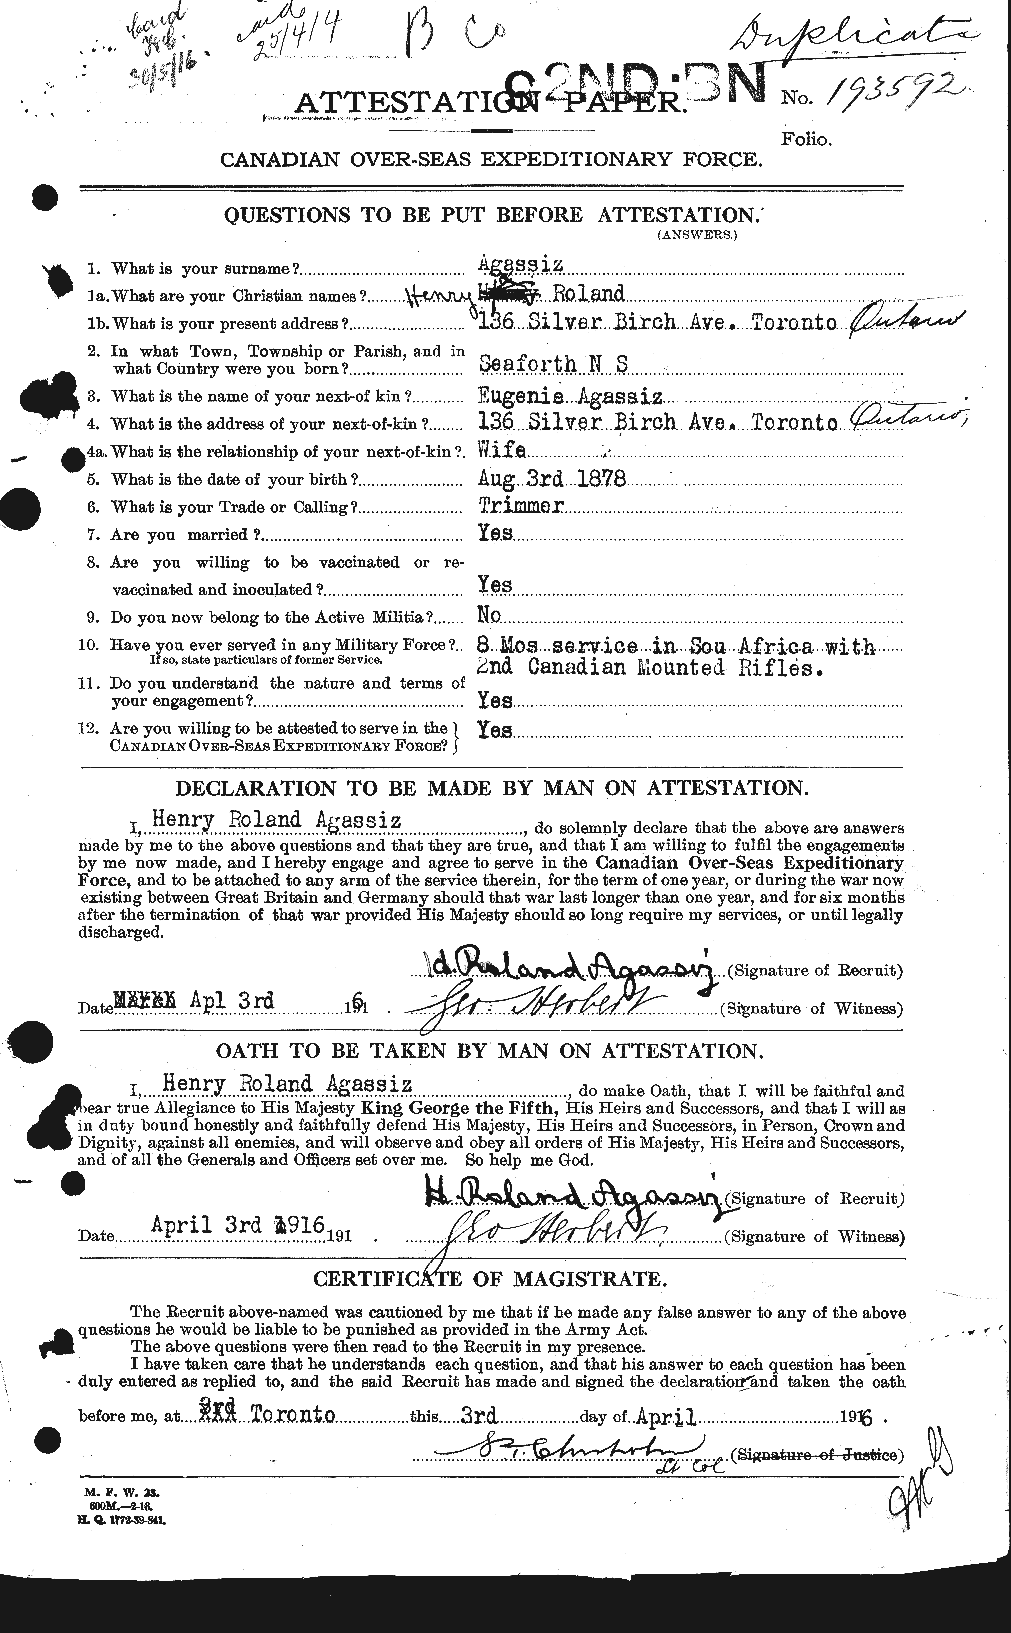 Personnel Records of the First World War - CEF 203698a